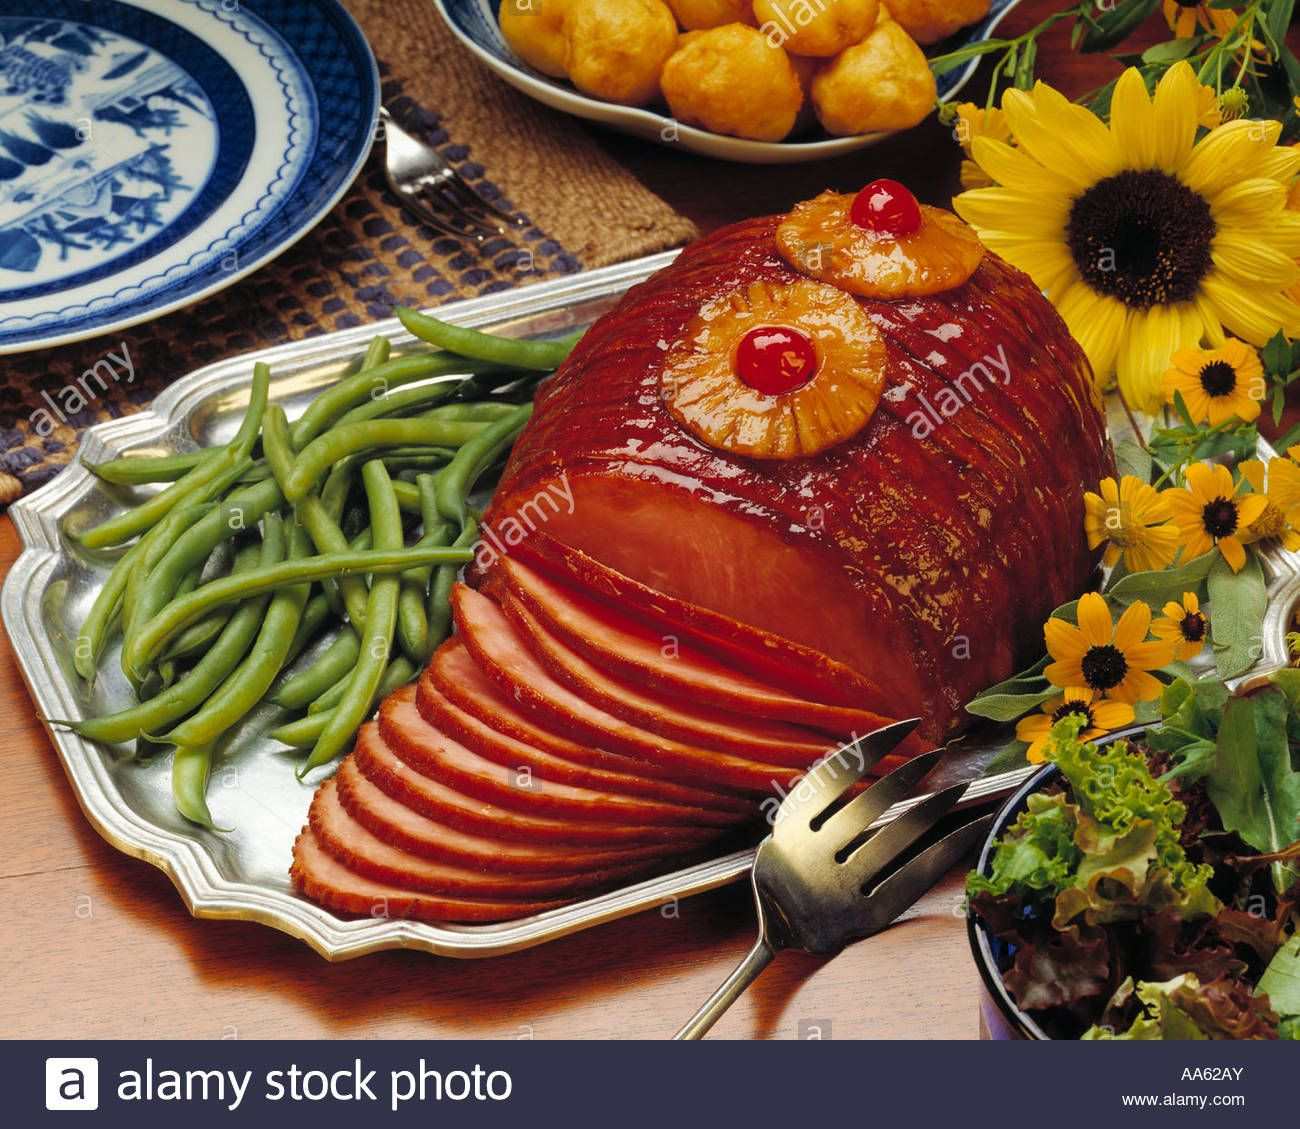 Fully Cooked Turkey For Thanksgiving
 Fully Cooked Whole Spiral Ham Dinner Platter Garnish